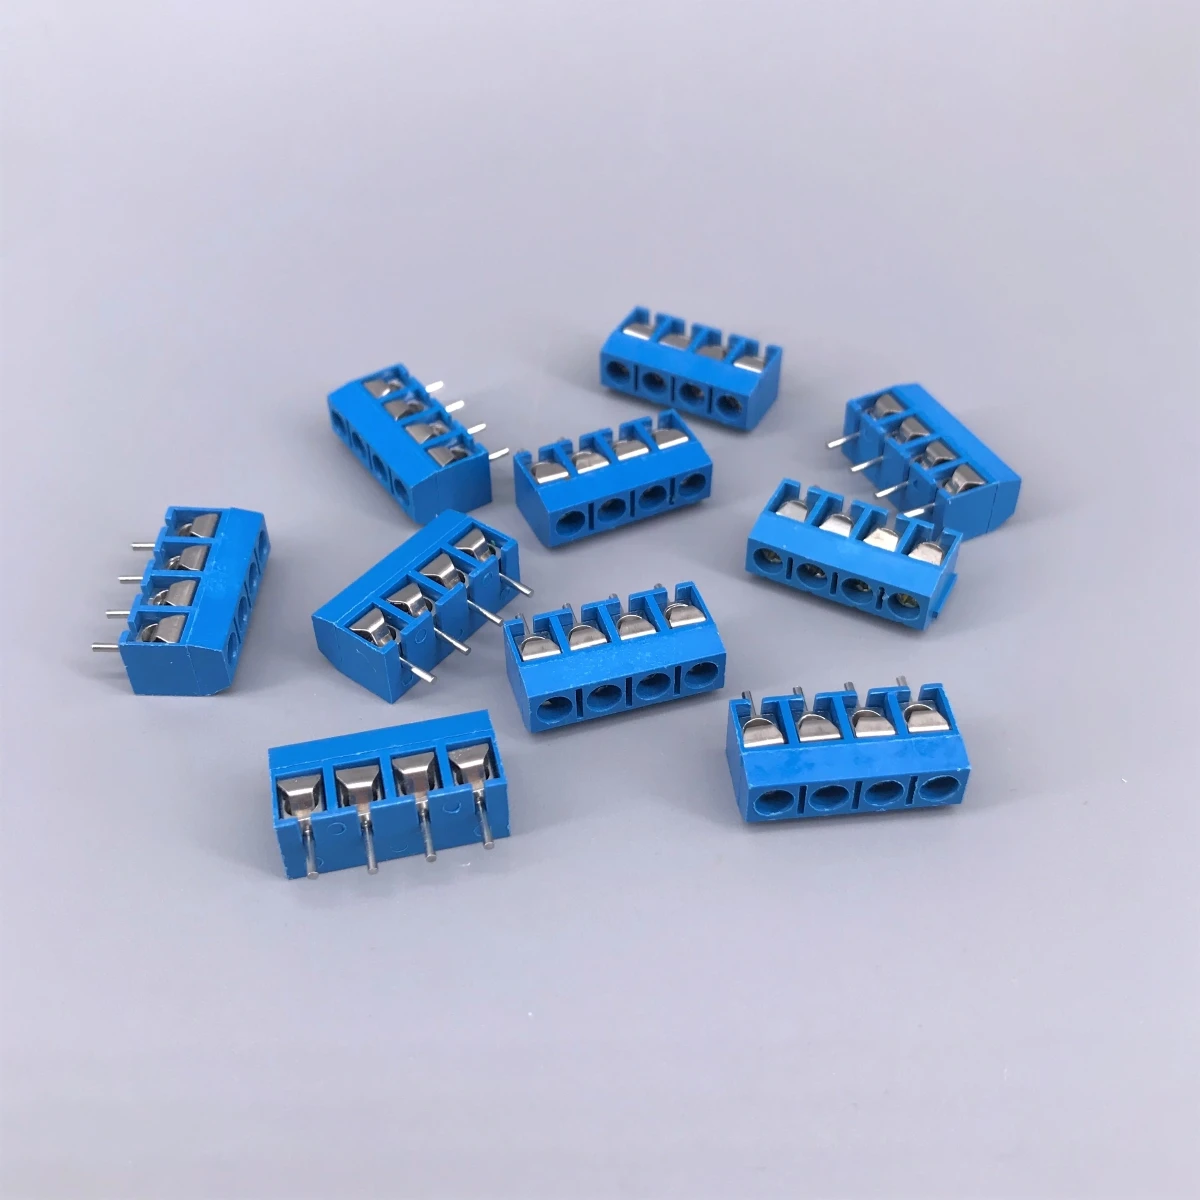 10 pieces 3 Pin Screw Terminal Block Connector Blue US seller Fast Shipping 